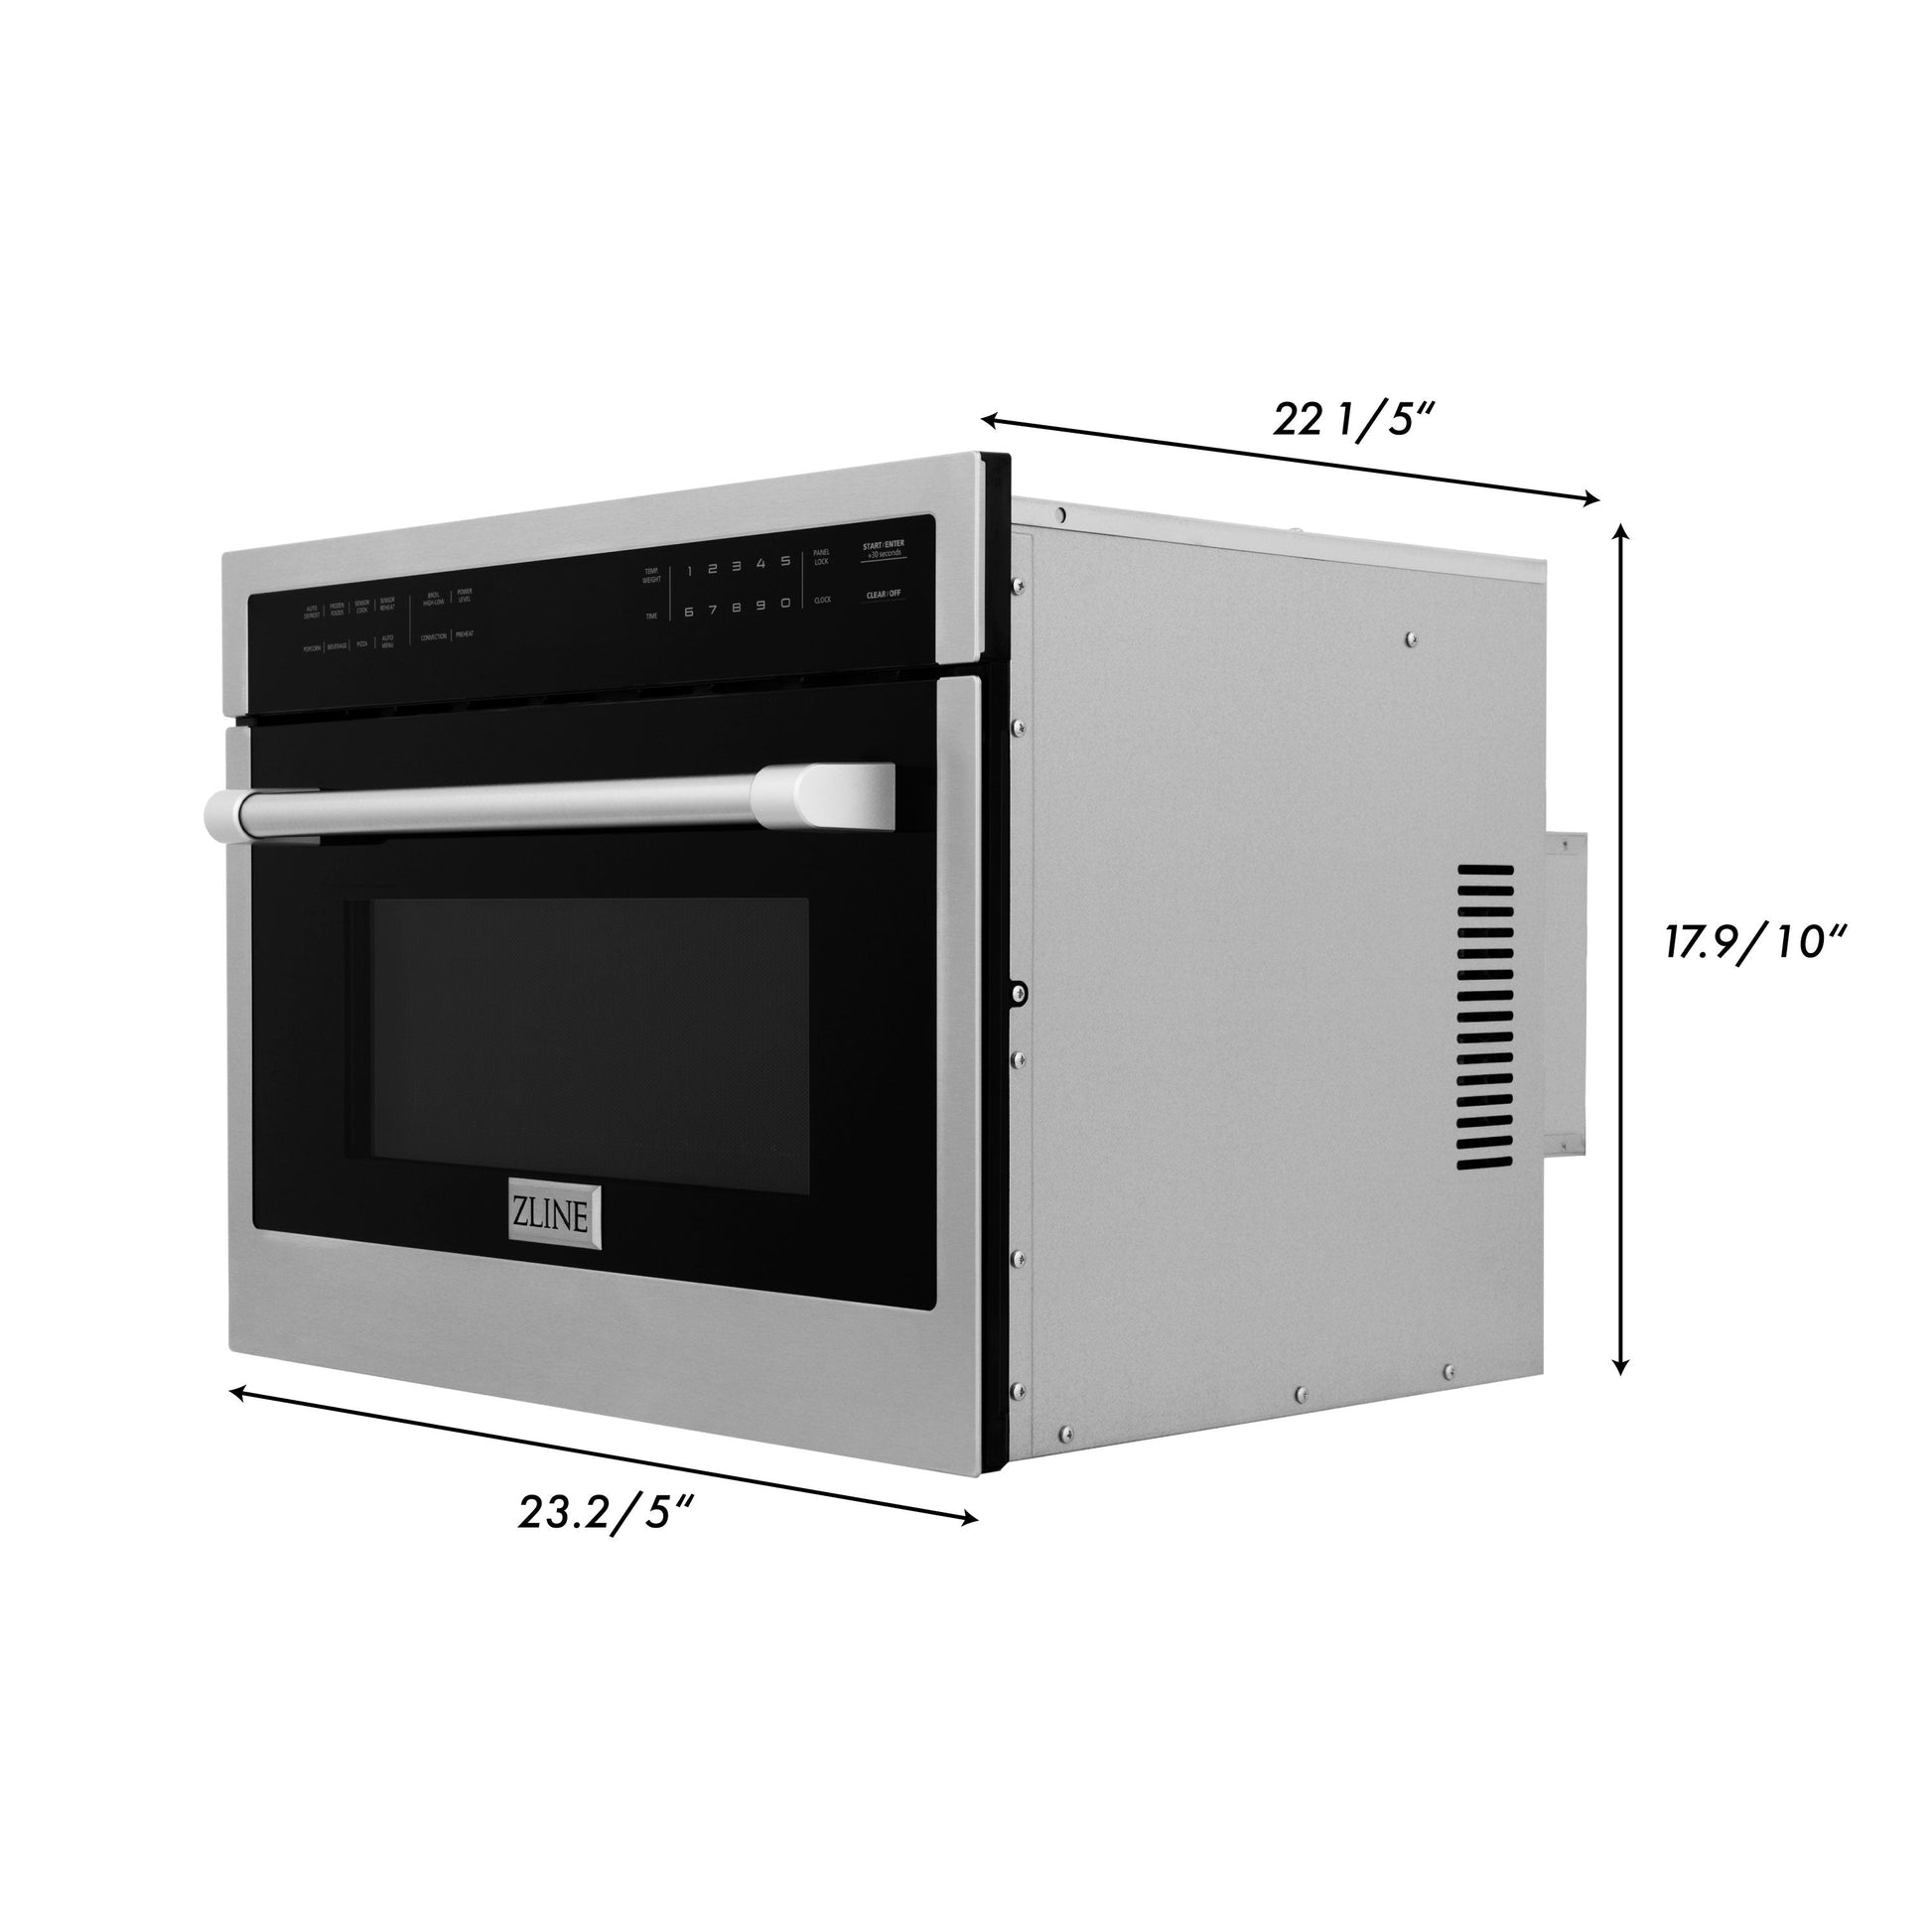 ZLINE 2-Appliance Kitchen Package with Stainless Steel 24" Built-in Convection Microwave Oven and 30" Single Wall Oven with Self Clean